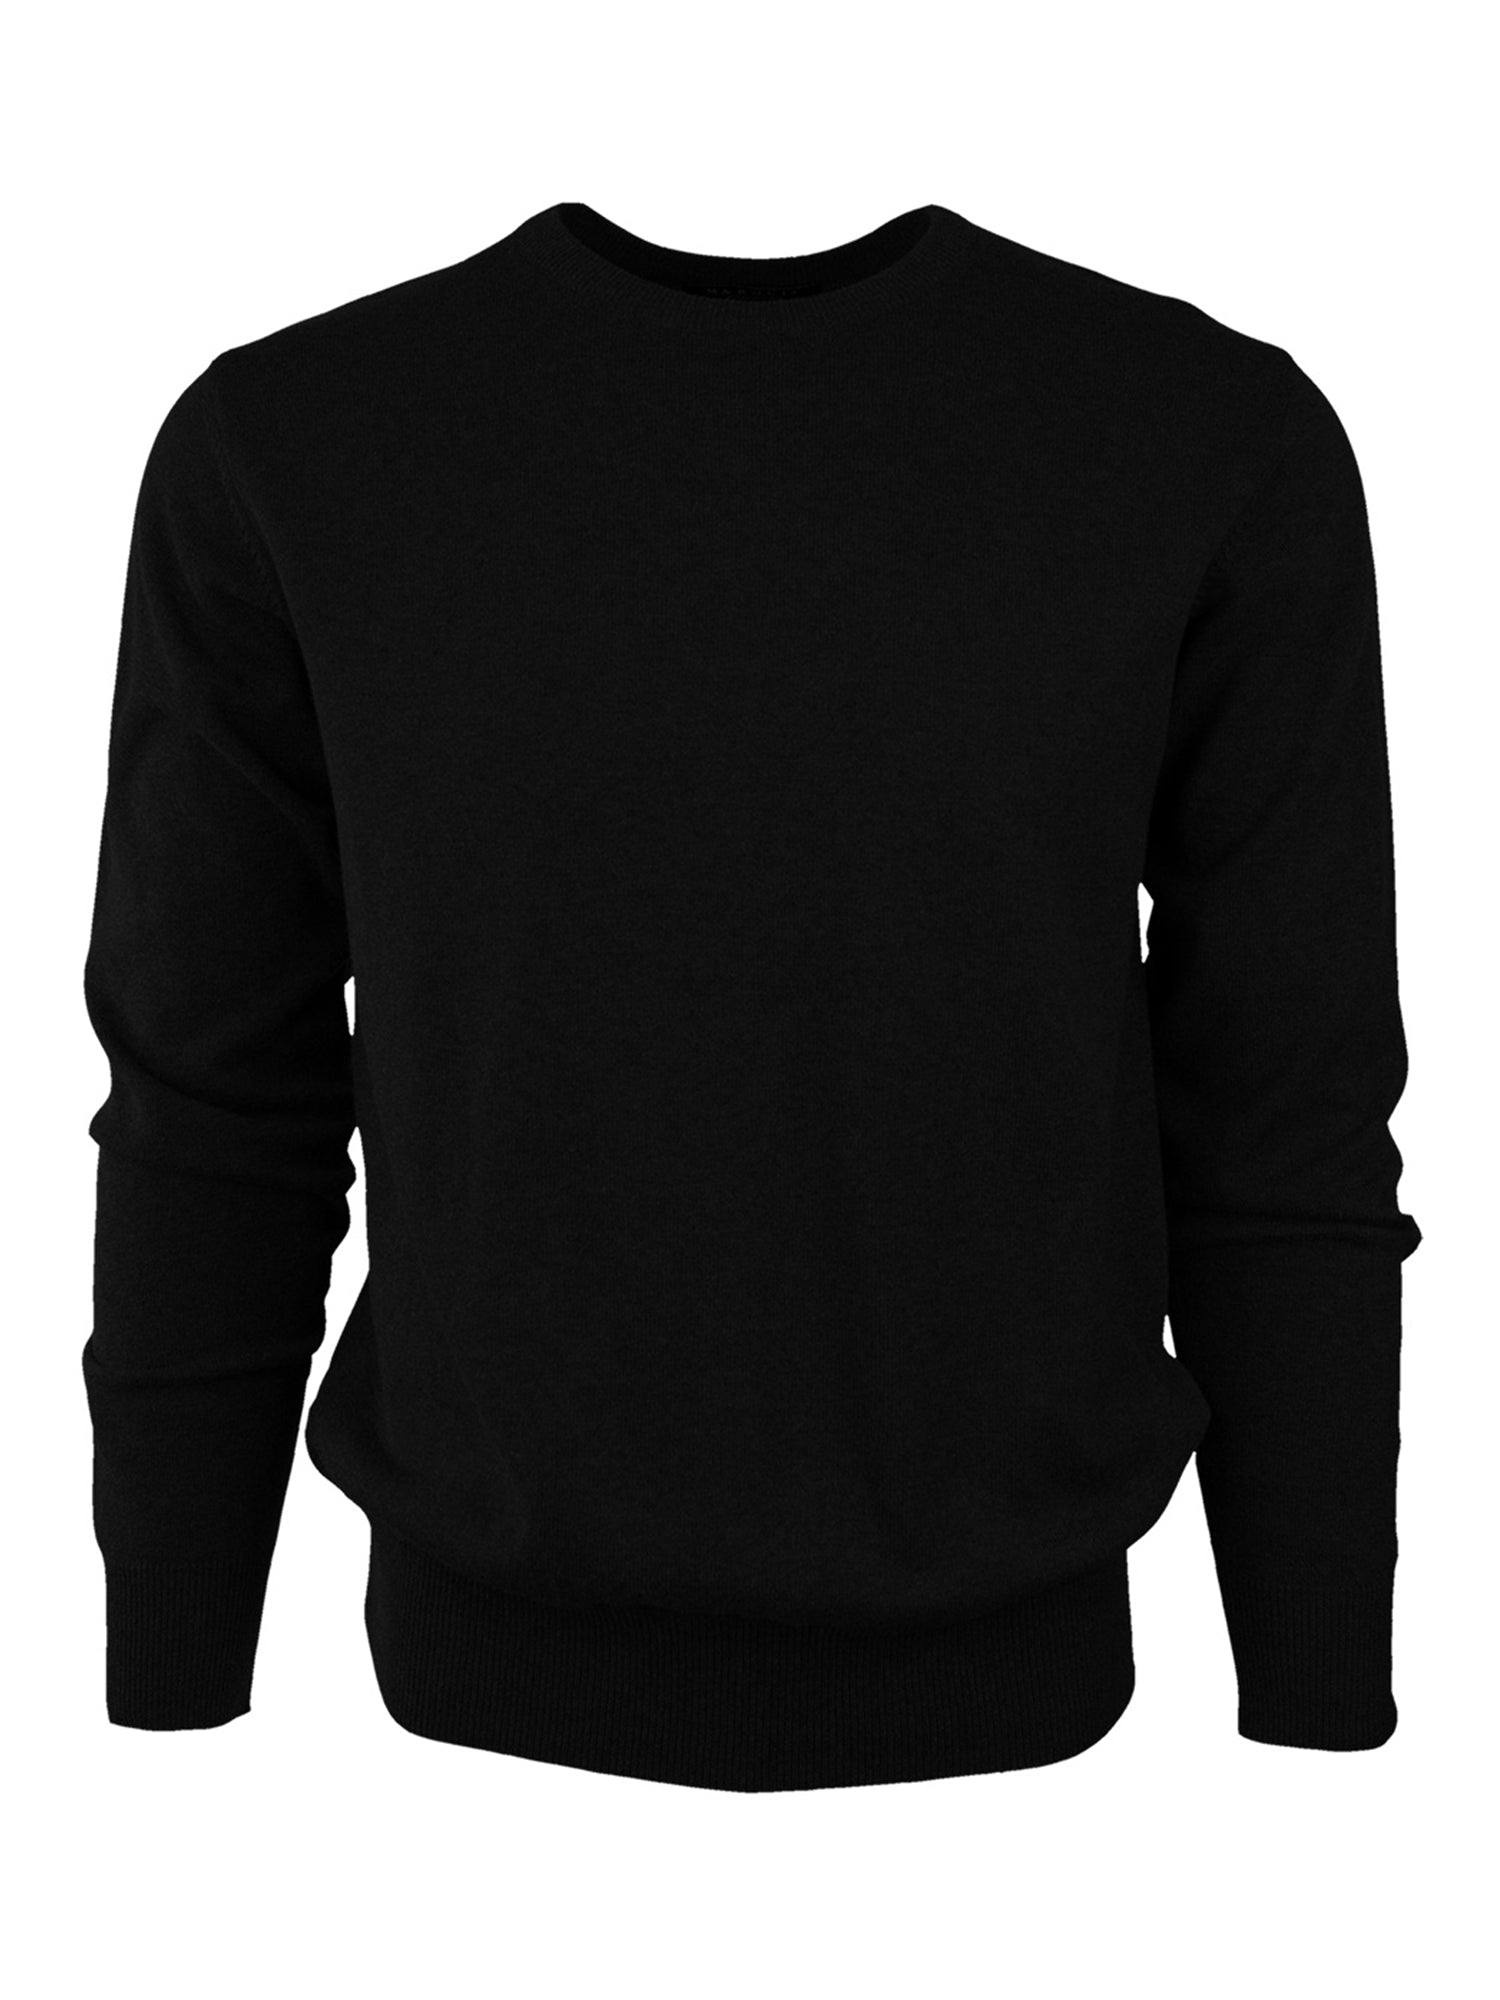 Marquis Solid Crew Neck Cotton Sweater For Men Sweater Marquis Black Small 